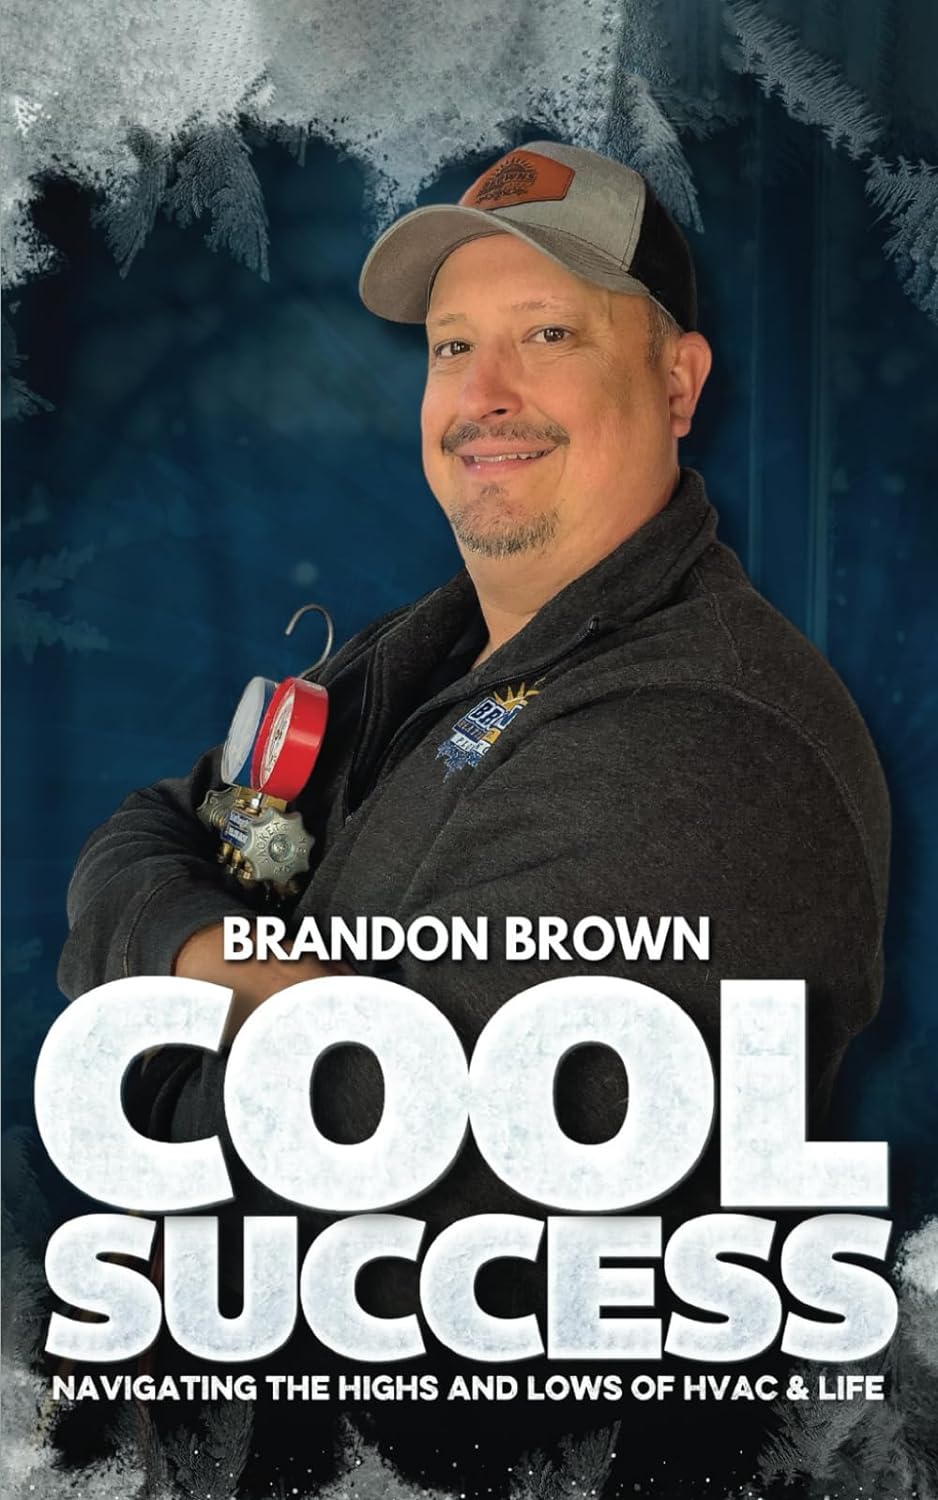 Inspirational Odyssey Unveiled: Brandon Brown’s "Cool Success" Chronicles Extraordinary Journey from Humble Beginnings to Triumph